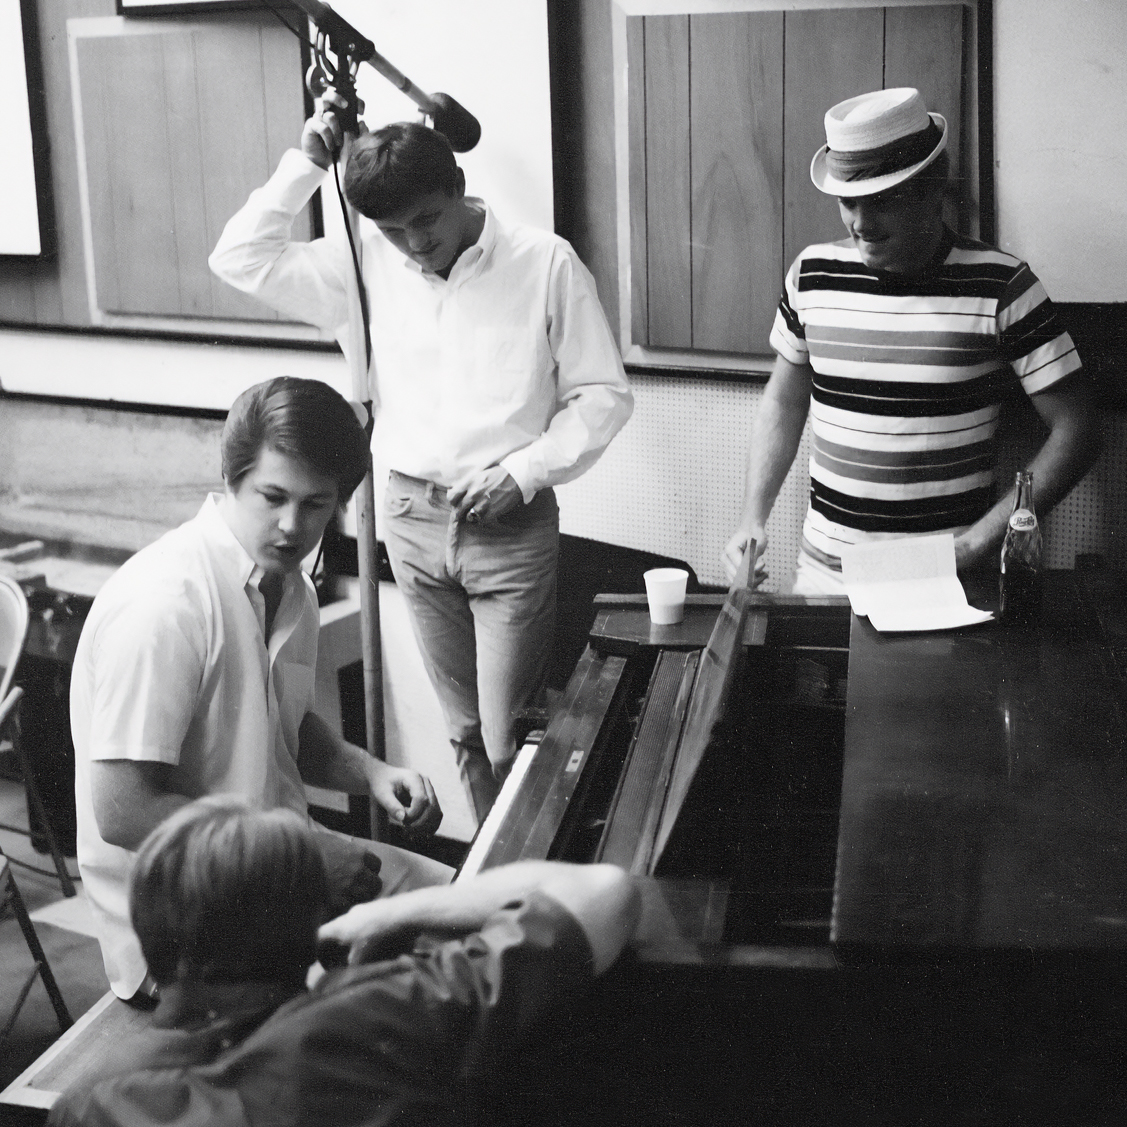 “I could go into the studio and cut a record in three hours. I’d say, ‘Hey we’ll make the best record ever tonight.’ I had that kind of spirit – and goddamn if it didn’t work!”

#1960s
#hitrecord
#bestrecordever
@capitolrecords
@thebeachboys